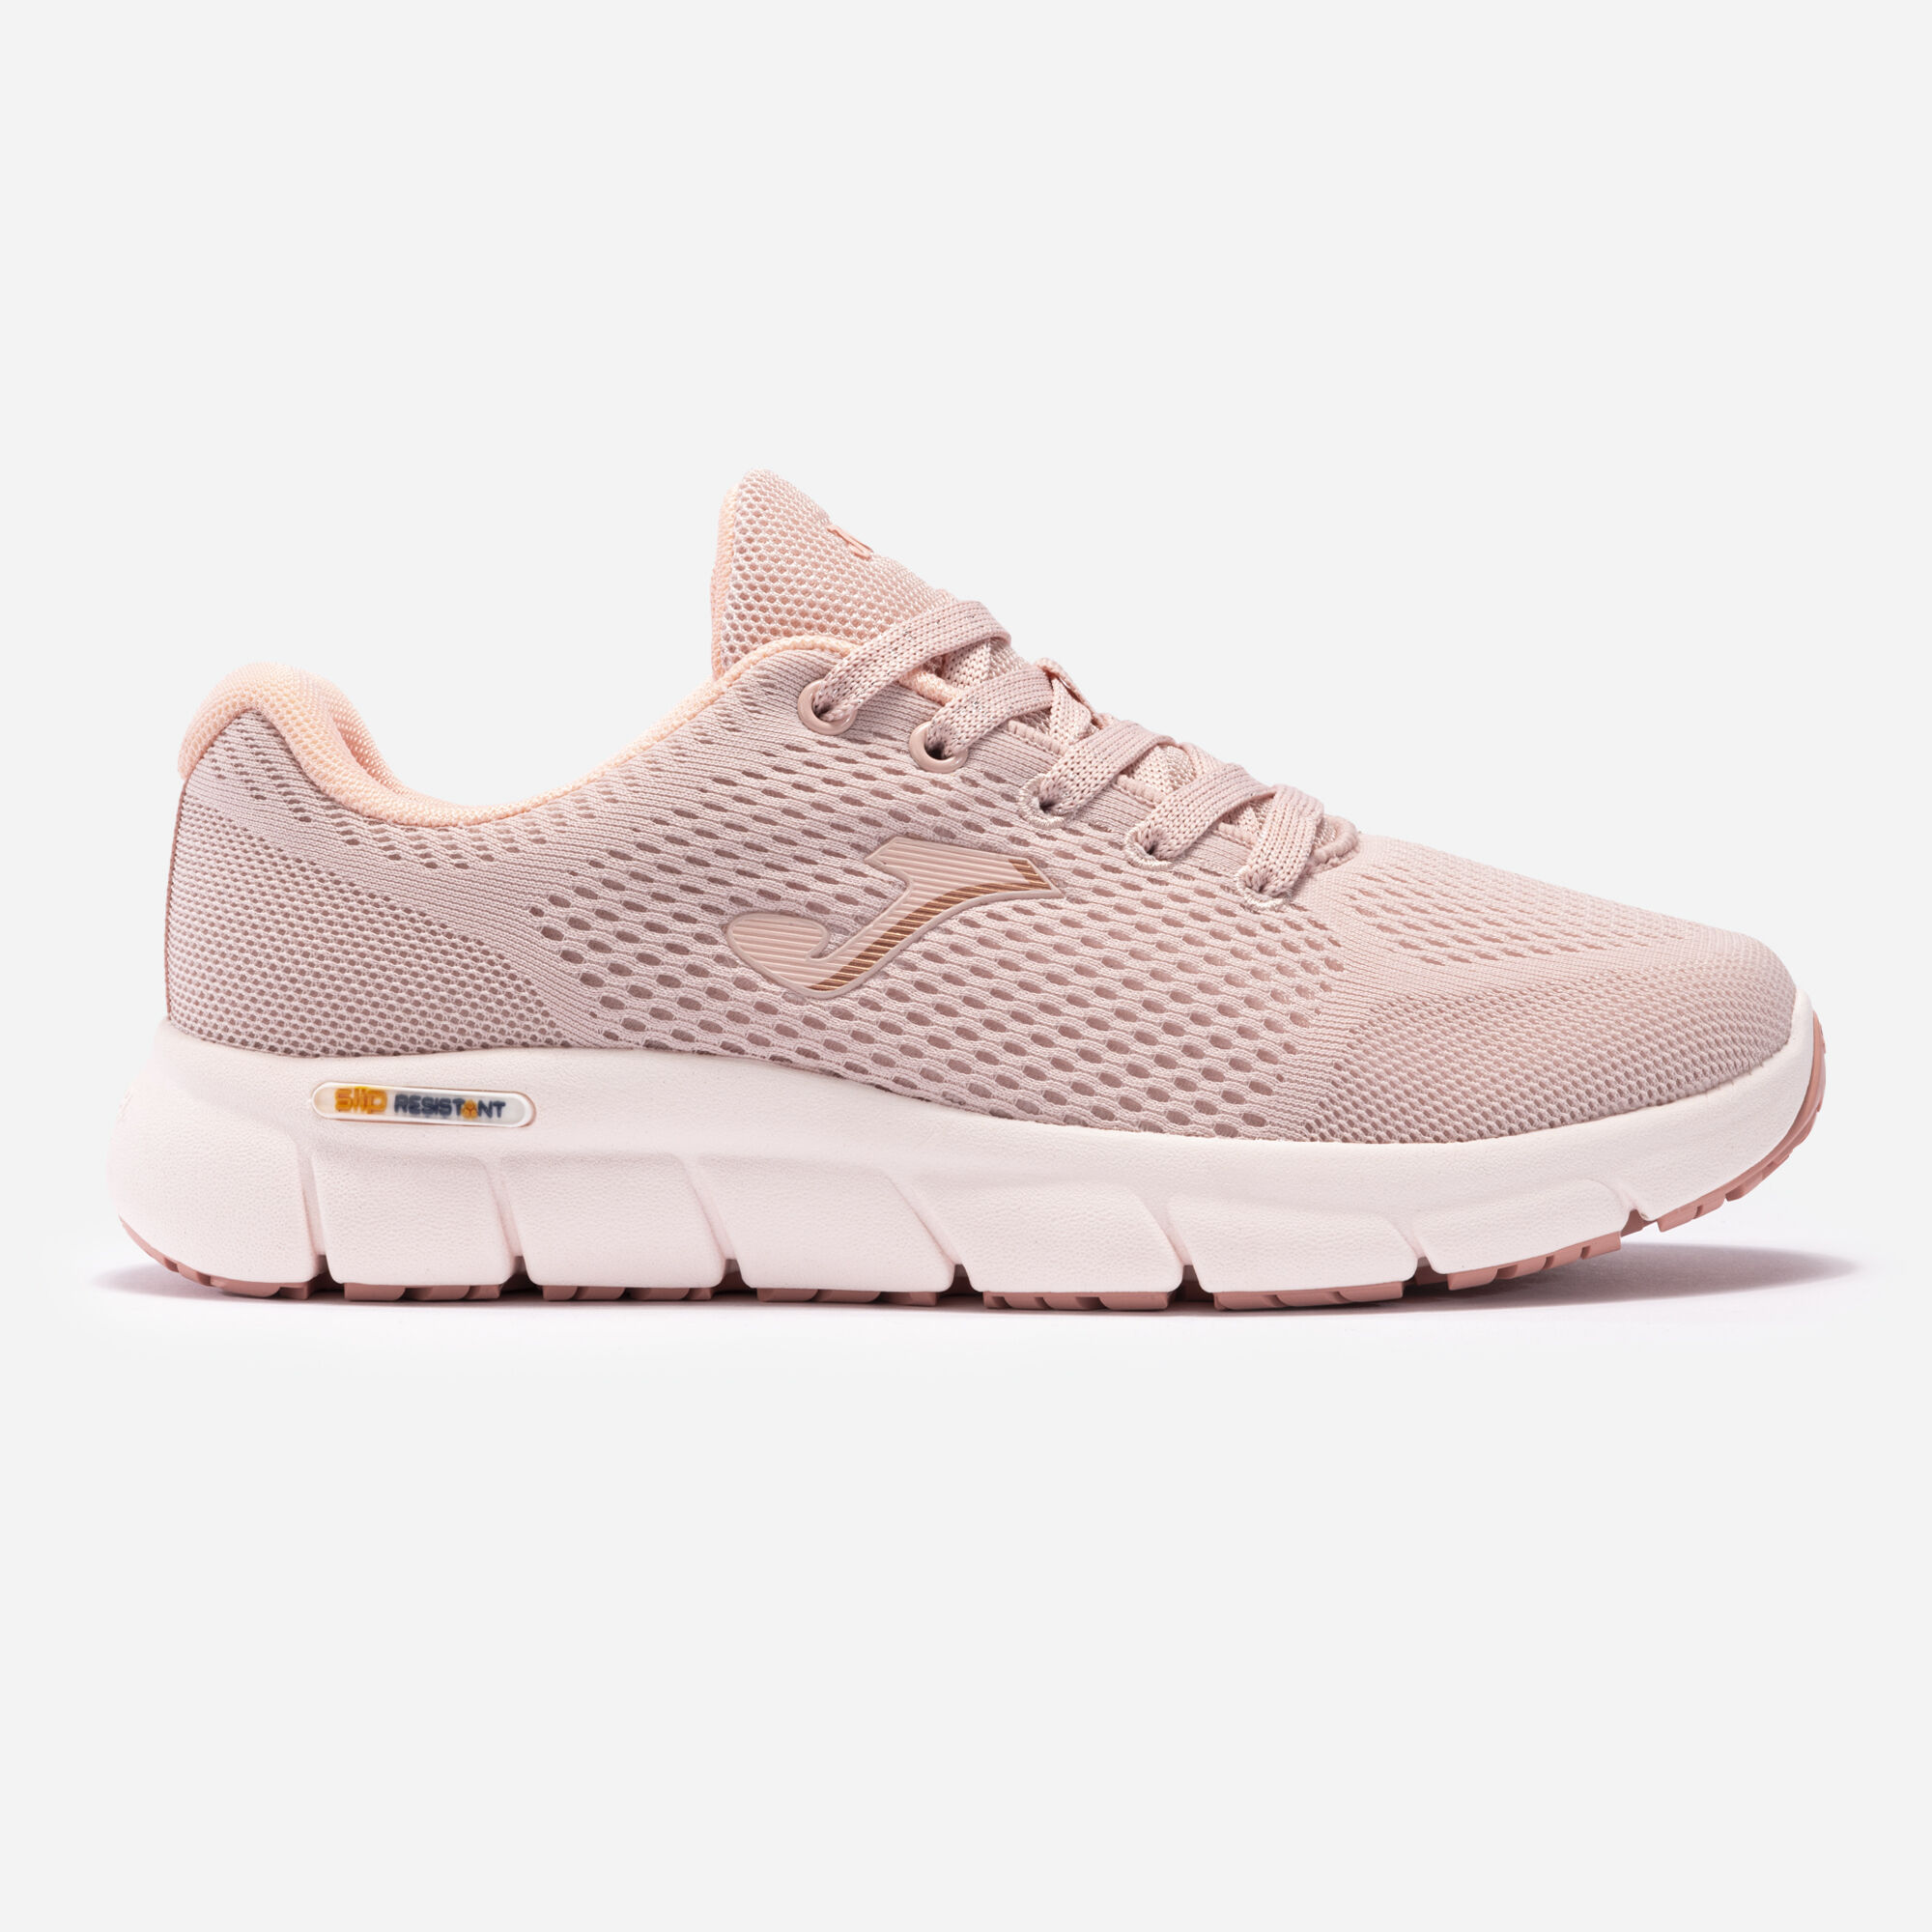 Chaussures casual Zen Lady 23 femme rose